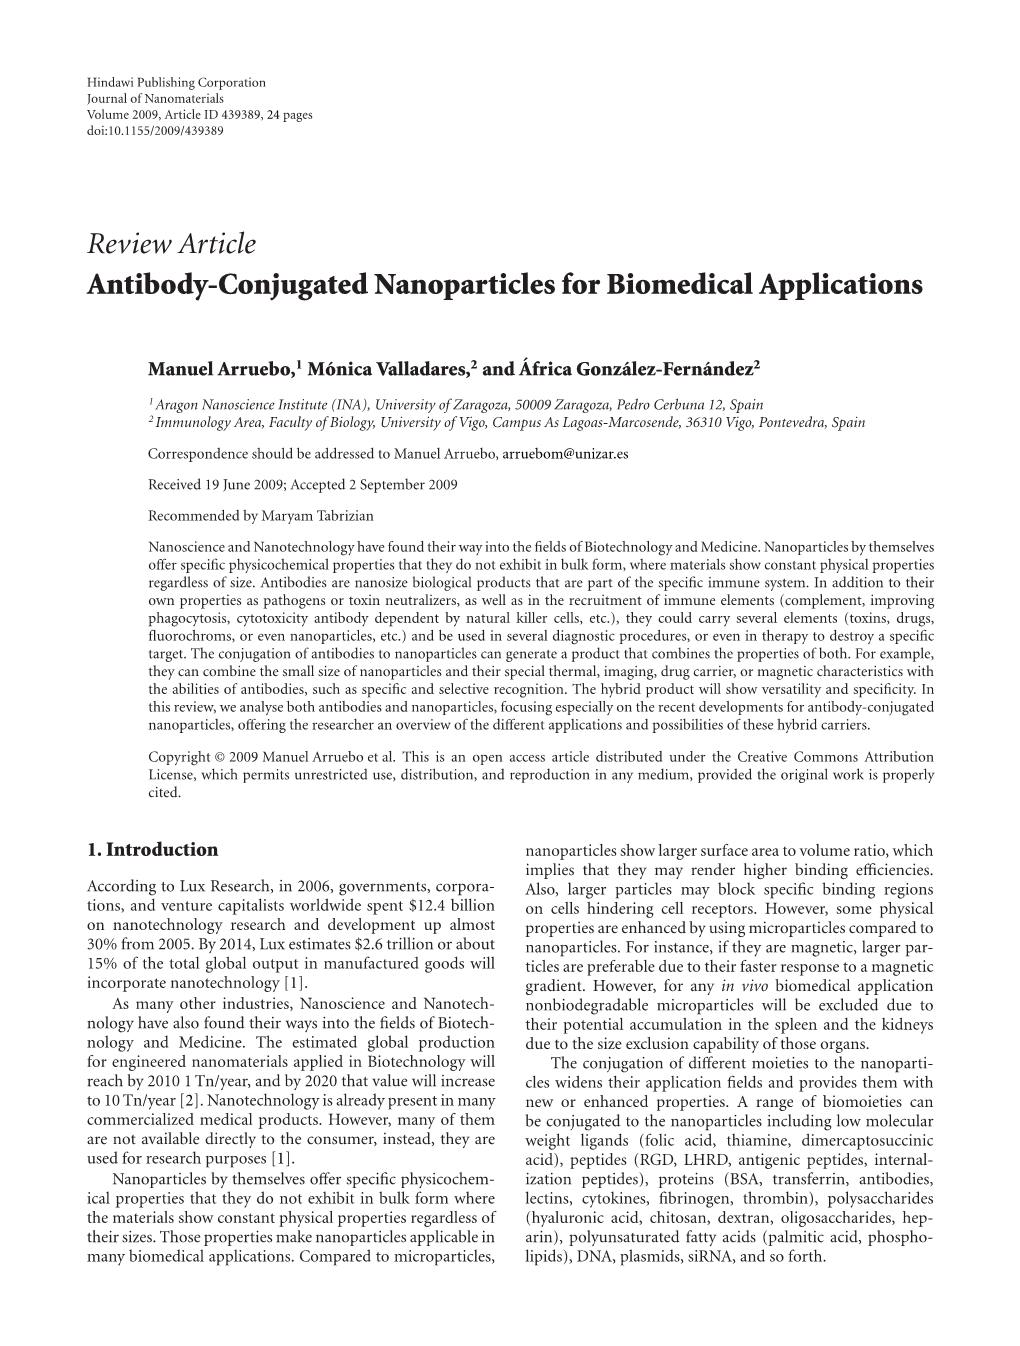 Antibody-Conjugated Nanoparticles for Biomedical Applications